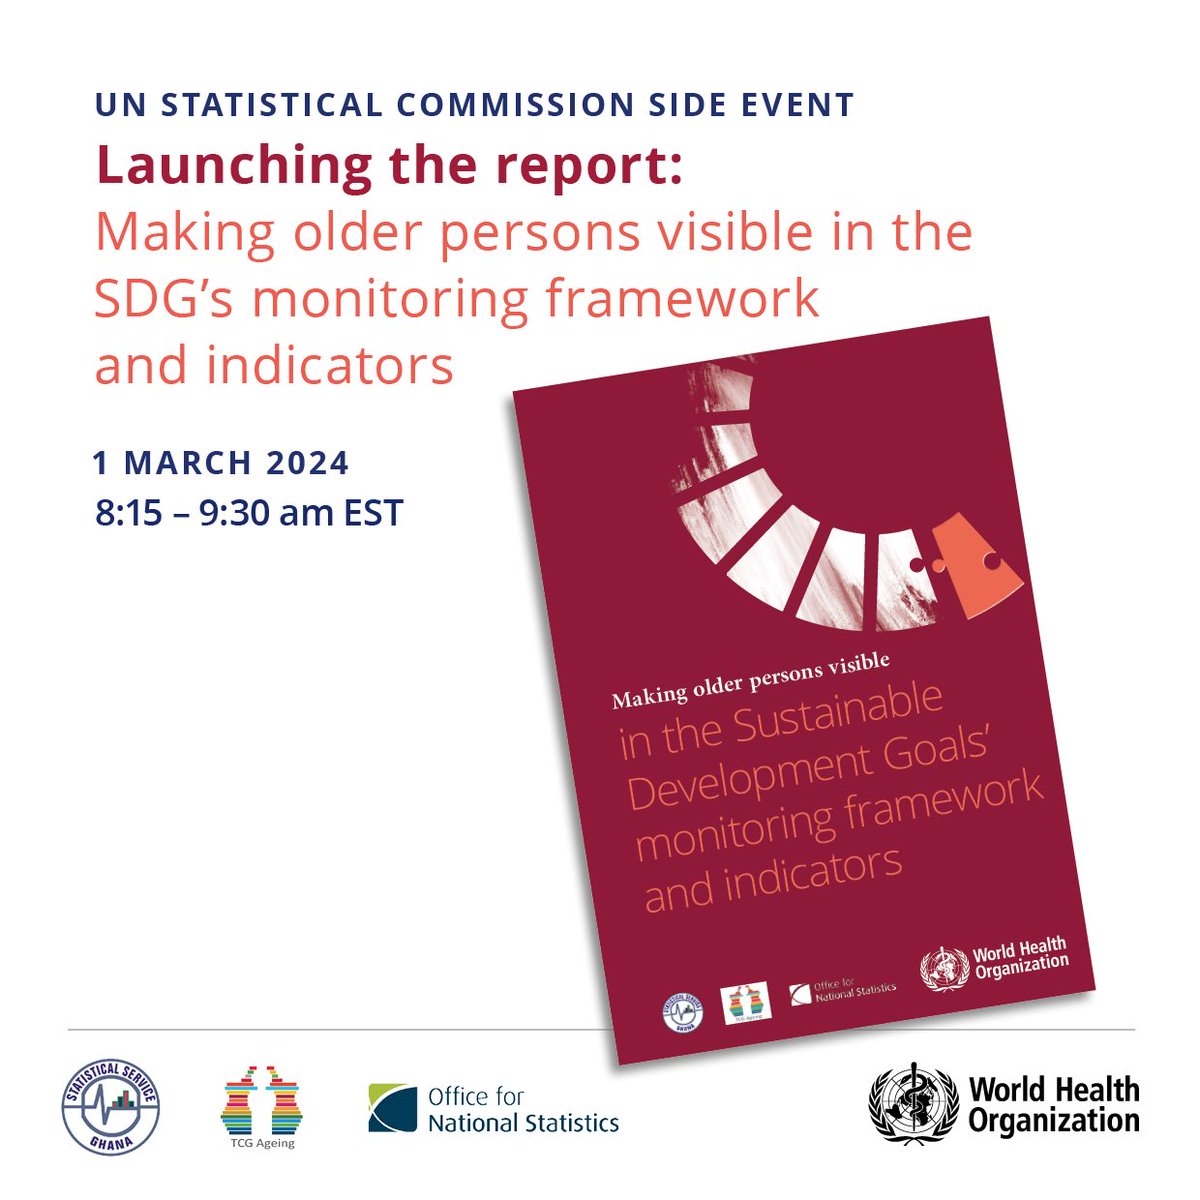 Join us on Friday, 1 March 2024 at 2:15 CET for the launch of @WHO report on SDG indicators and older persons, co-sponsored by the UK Office of National Statistics, Ghana Statistical Service & Titchfield CGA. Register here 👉🏼 forms.gle/qvVbYQQTPcpbxR…  @UN4Ageing @UNDecadeAgeing